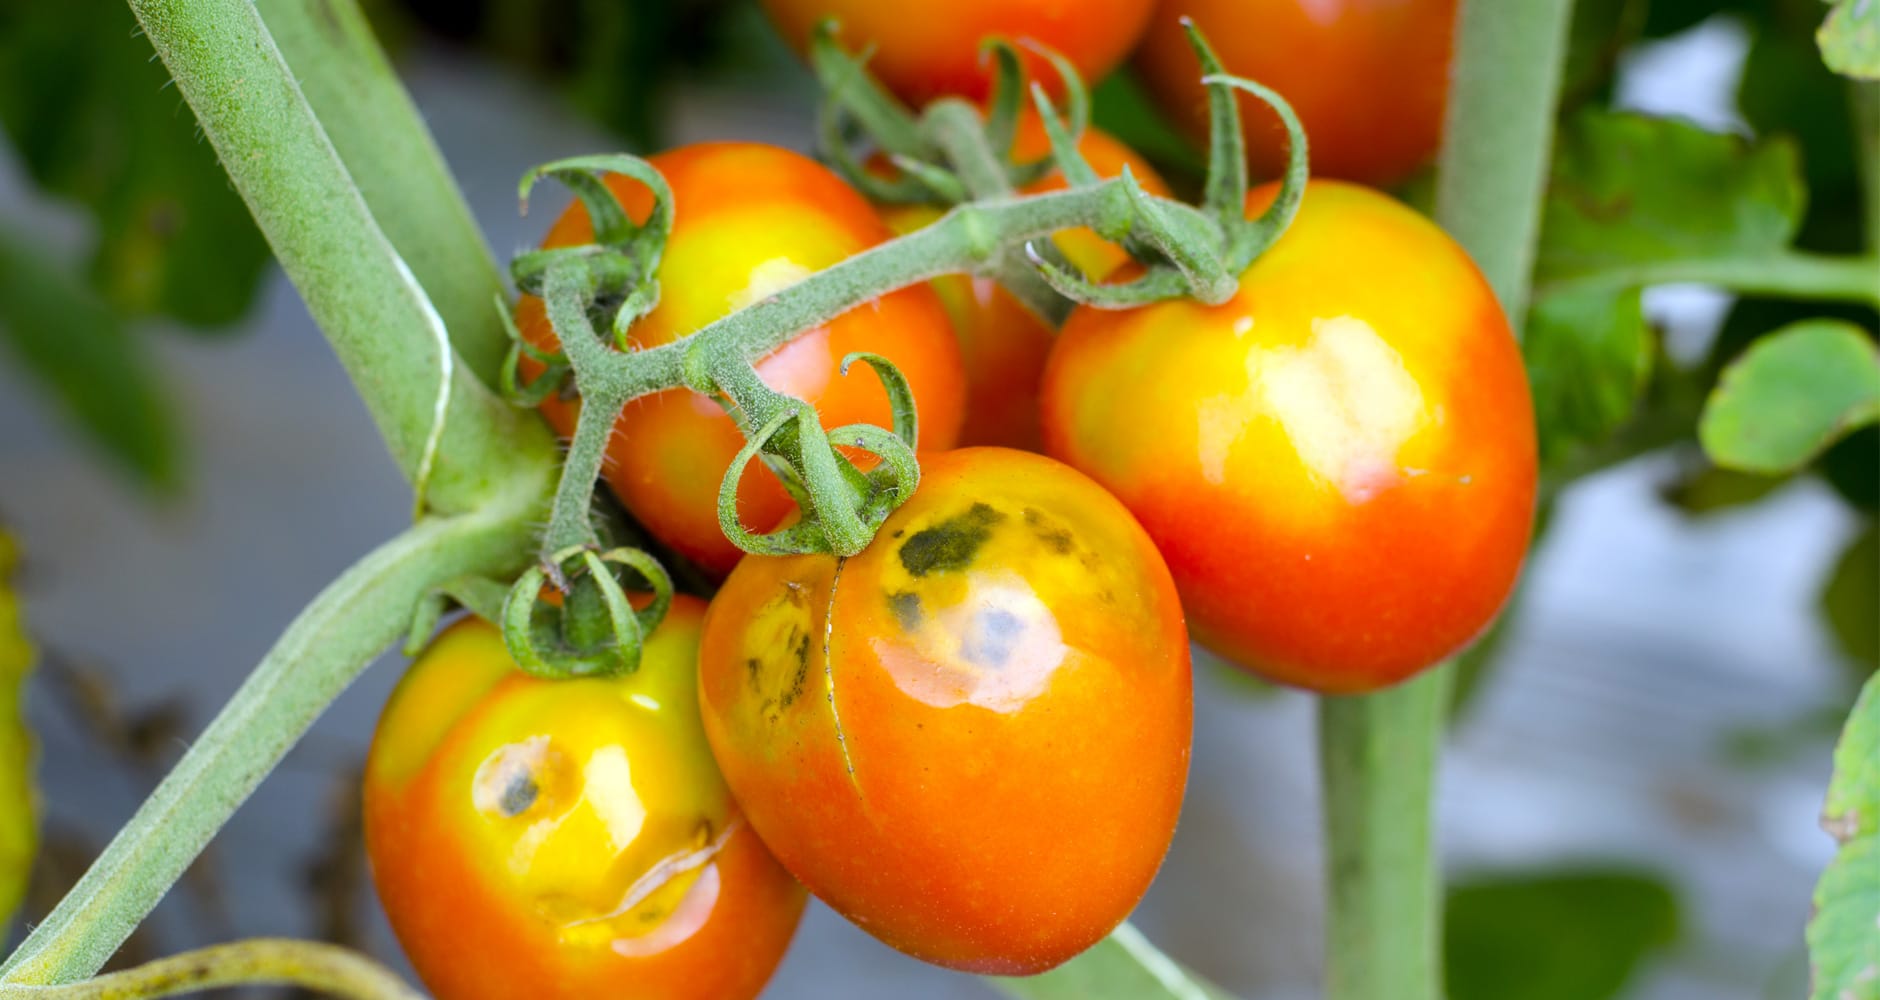 10 Common Tomato Plant Problems and How To Fix Them - Farmers' Almanac